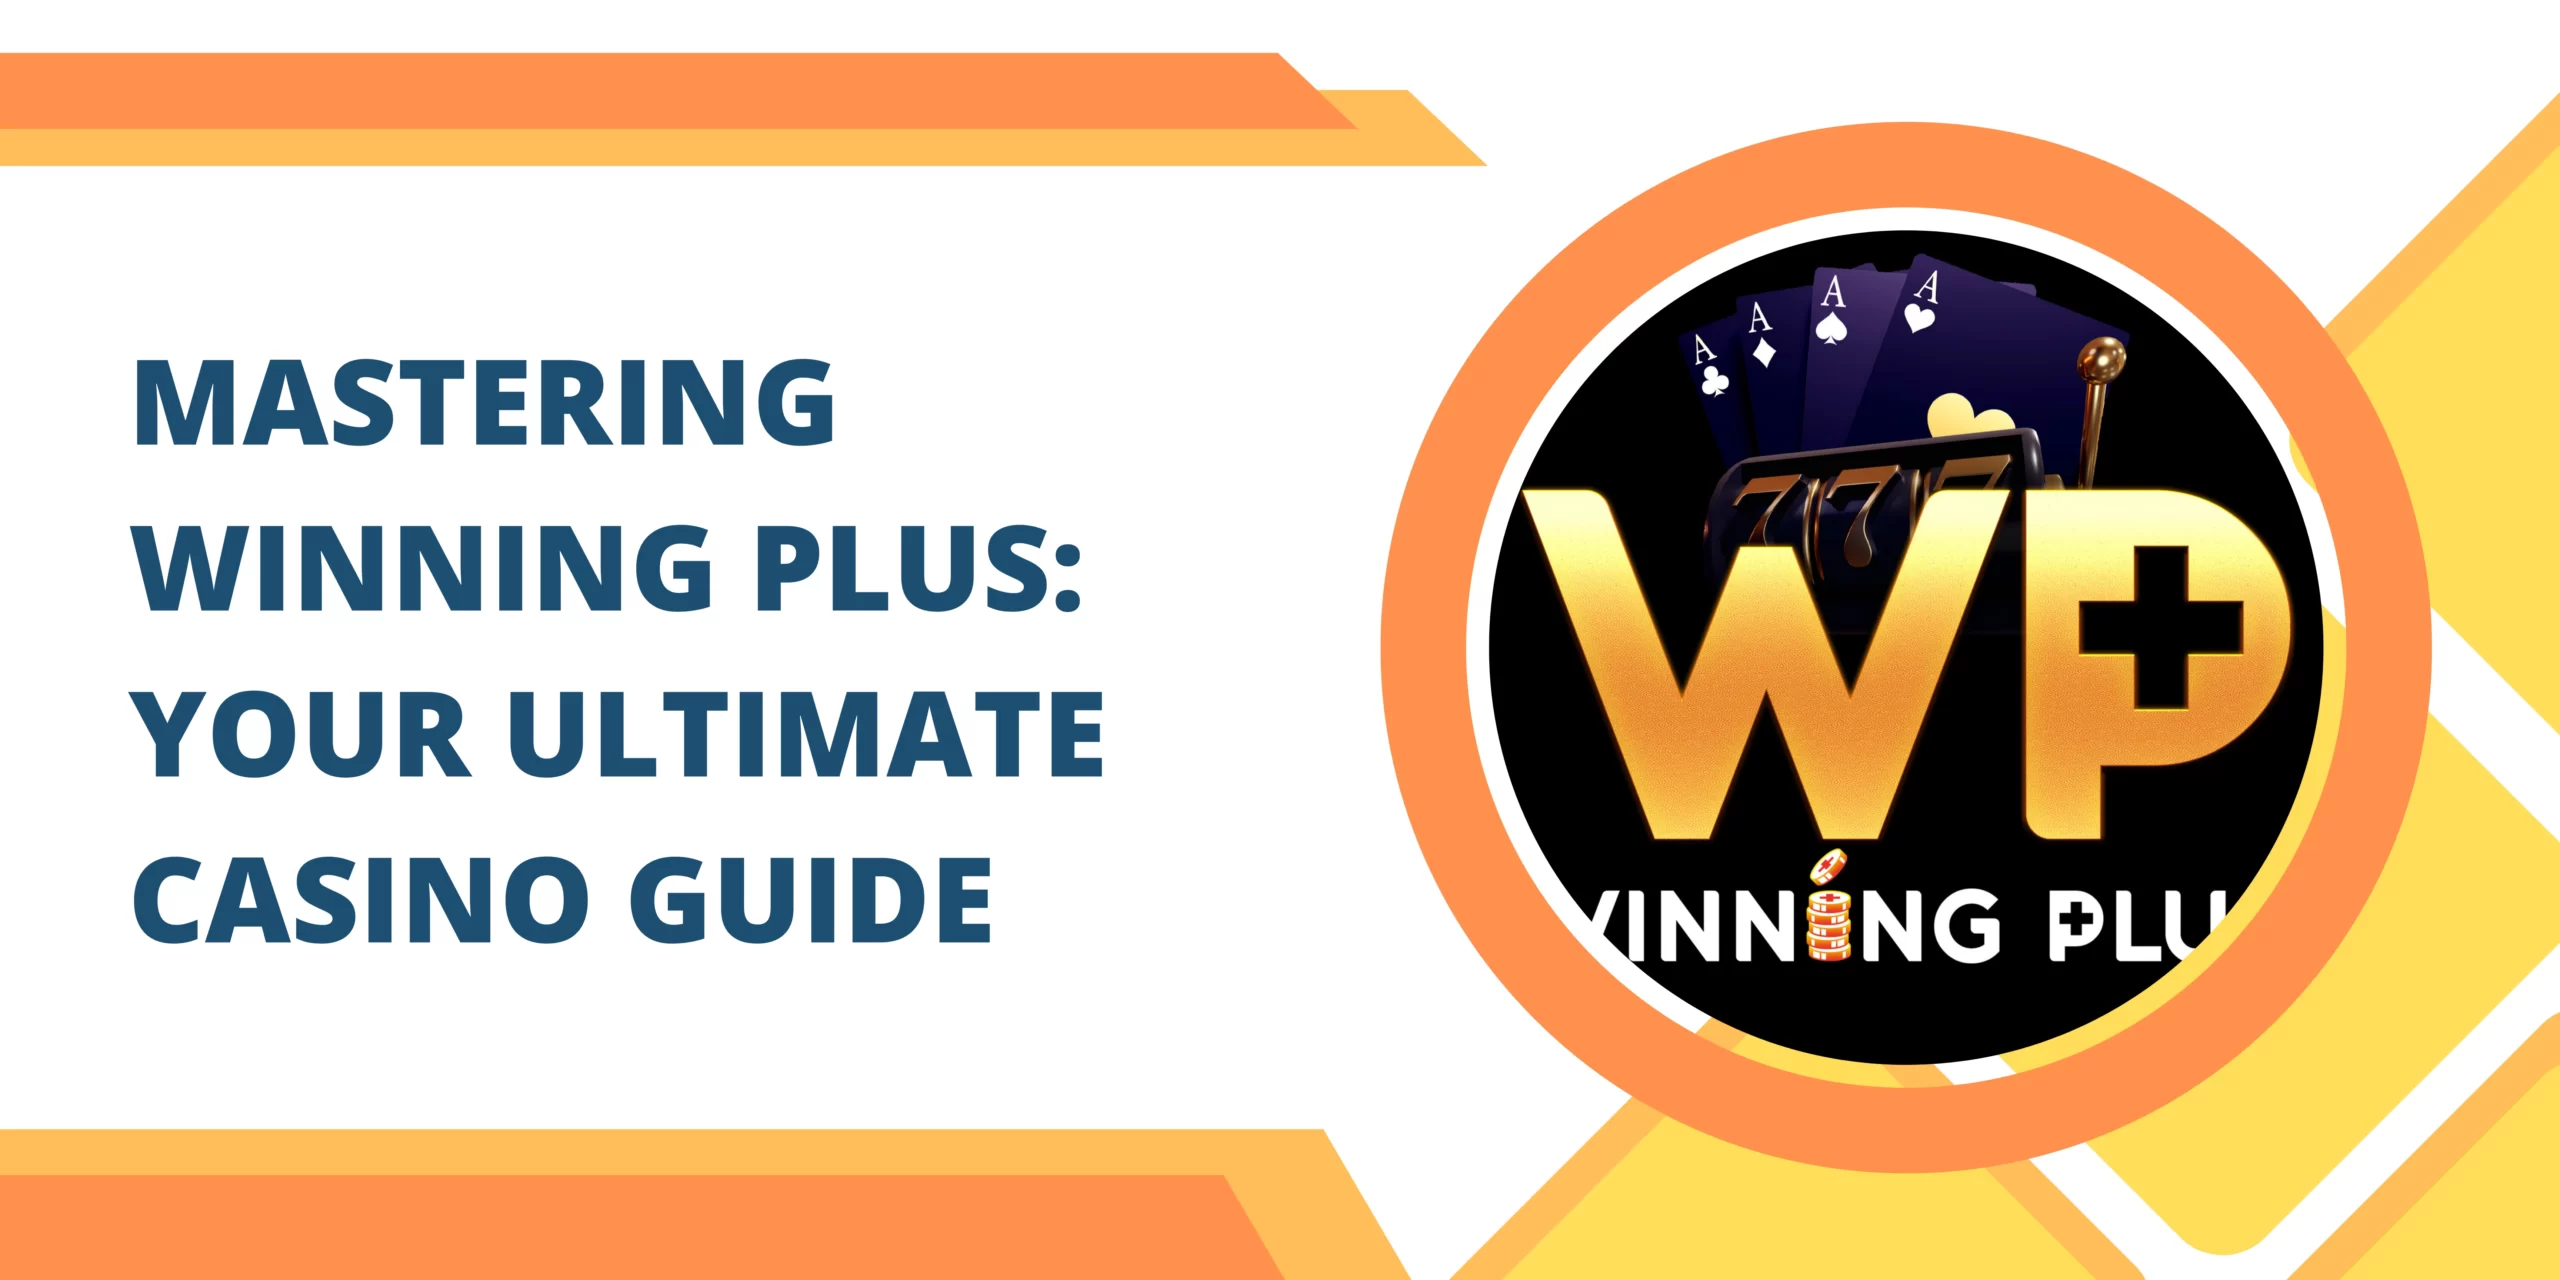 Mastering Winning Plus: Your Ultimate Casino Guide